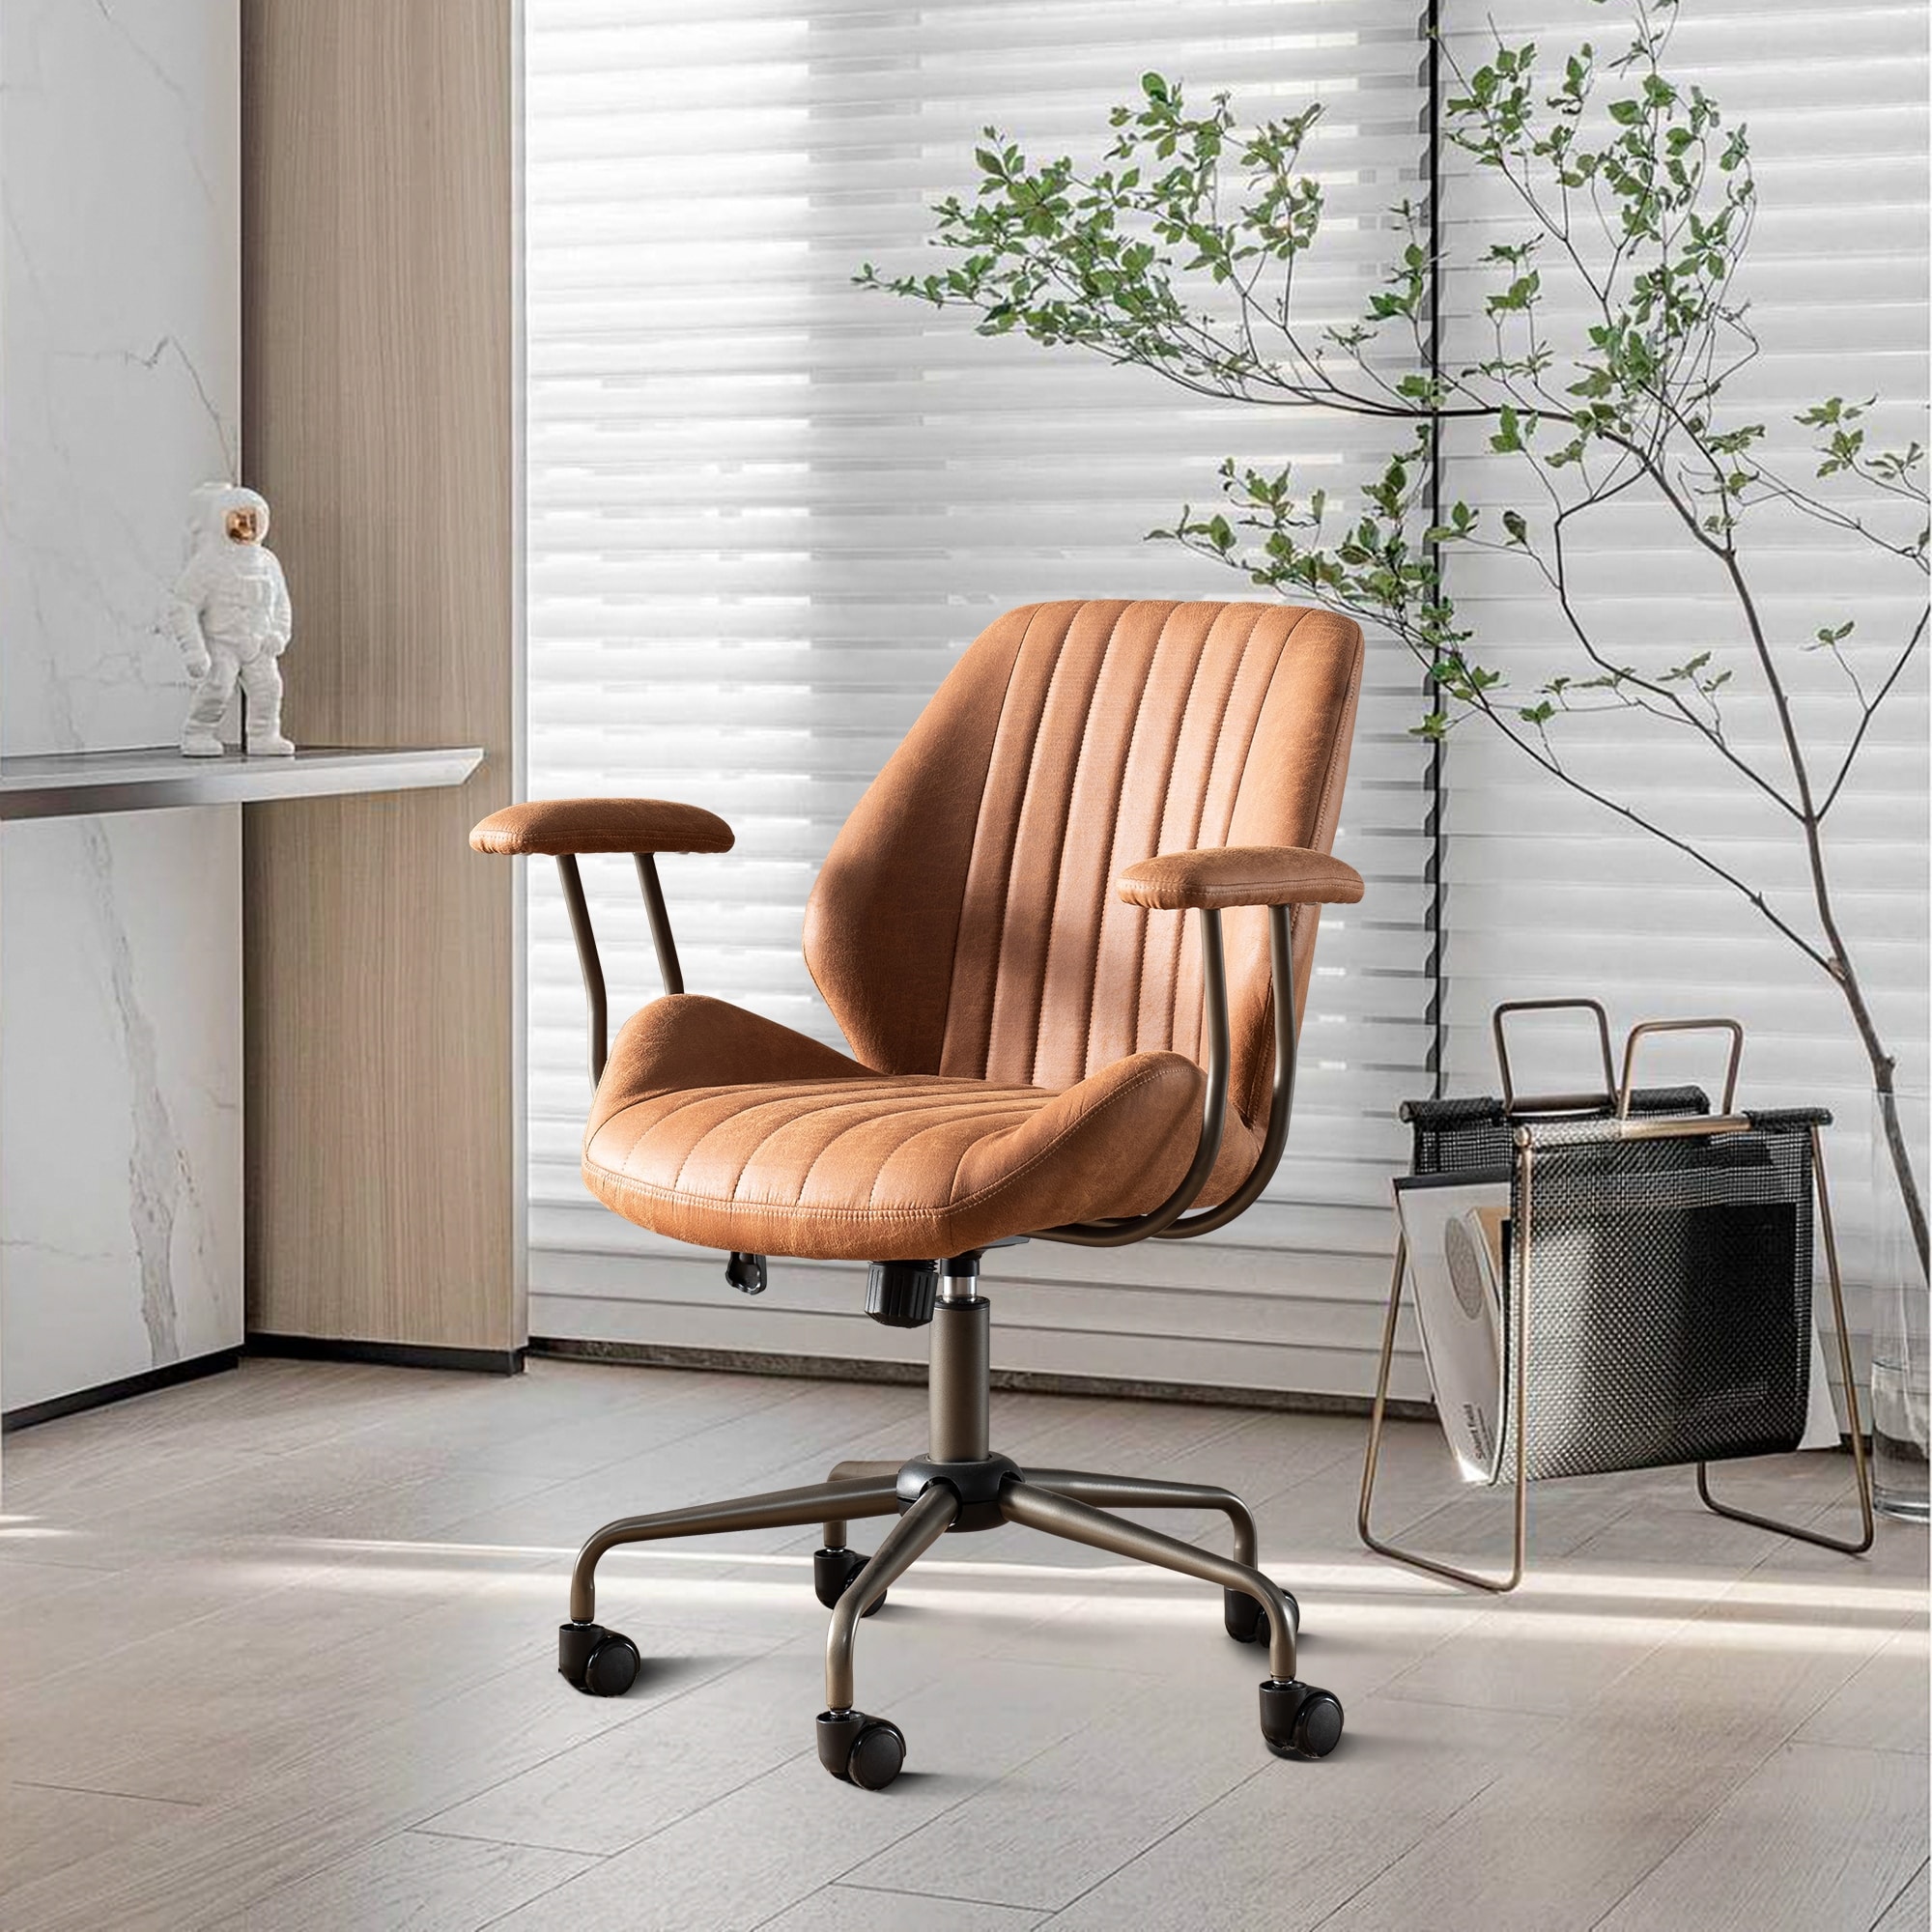 https://ak1.ostkcdn.com/images/products/is/images/direct/61231fb15859bd15b4c8b86e26244dbe8cabe0af/Ovios-Ergonomic-Classic-Suede-Office-Chair-Desk-Chair.jpg